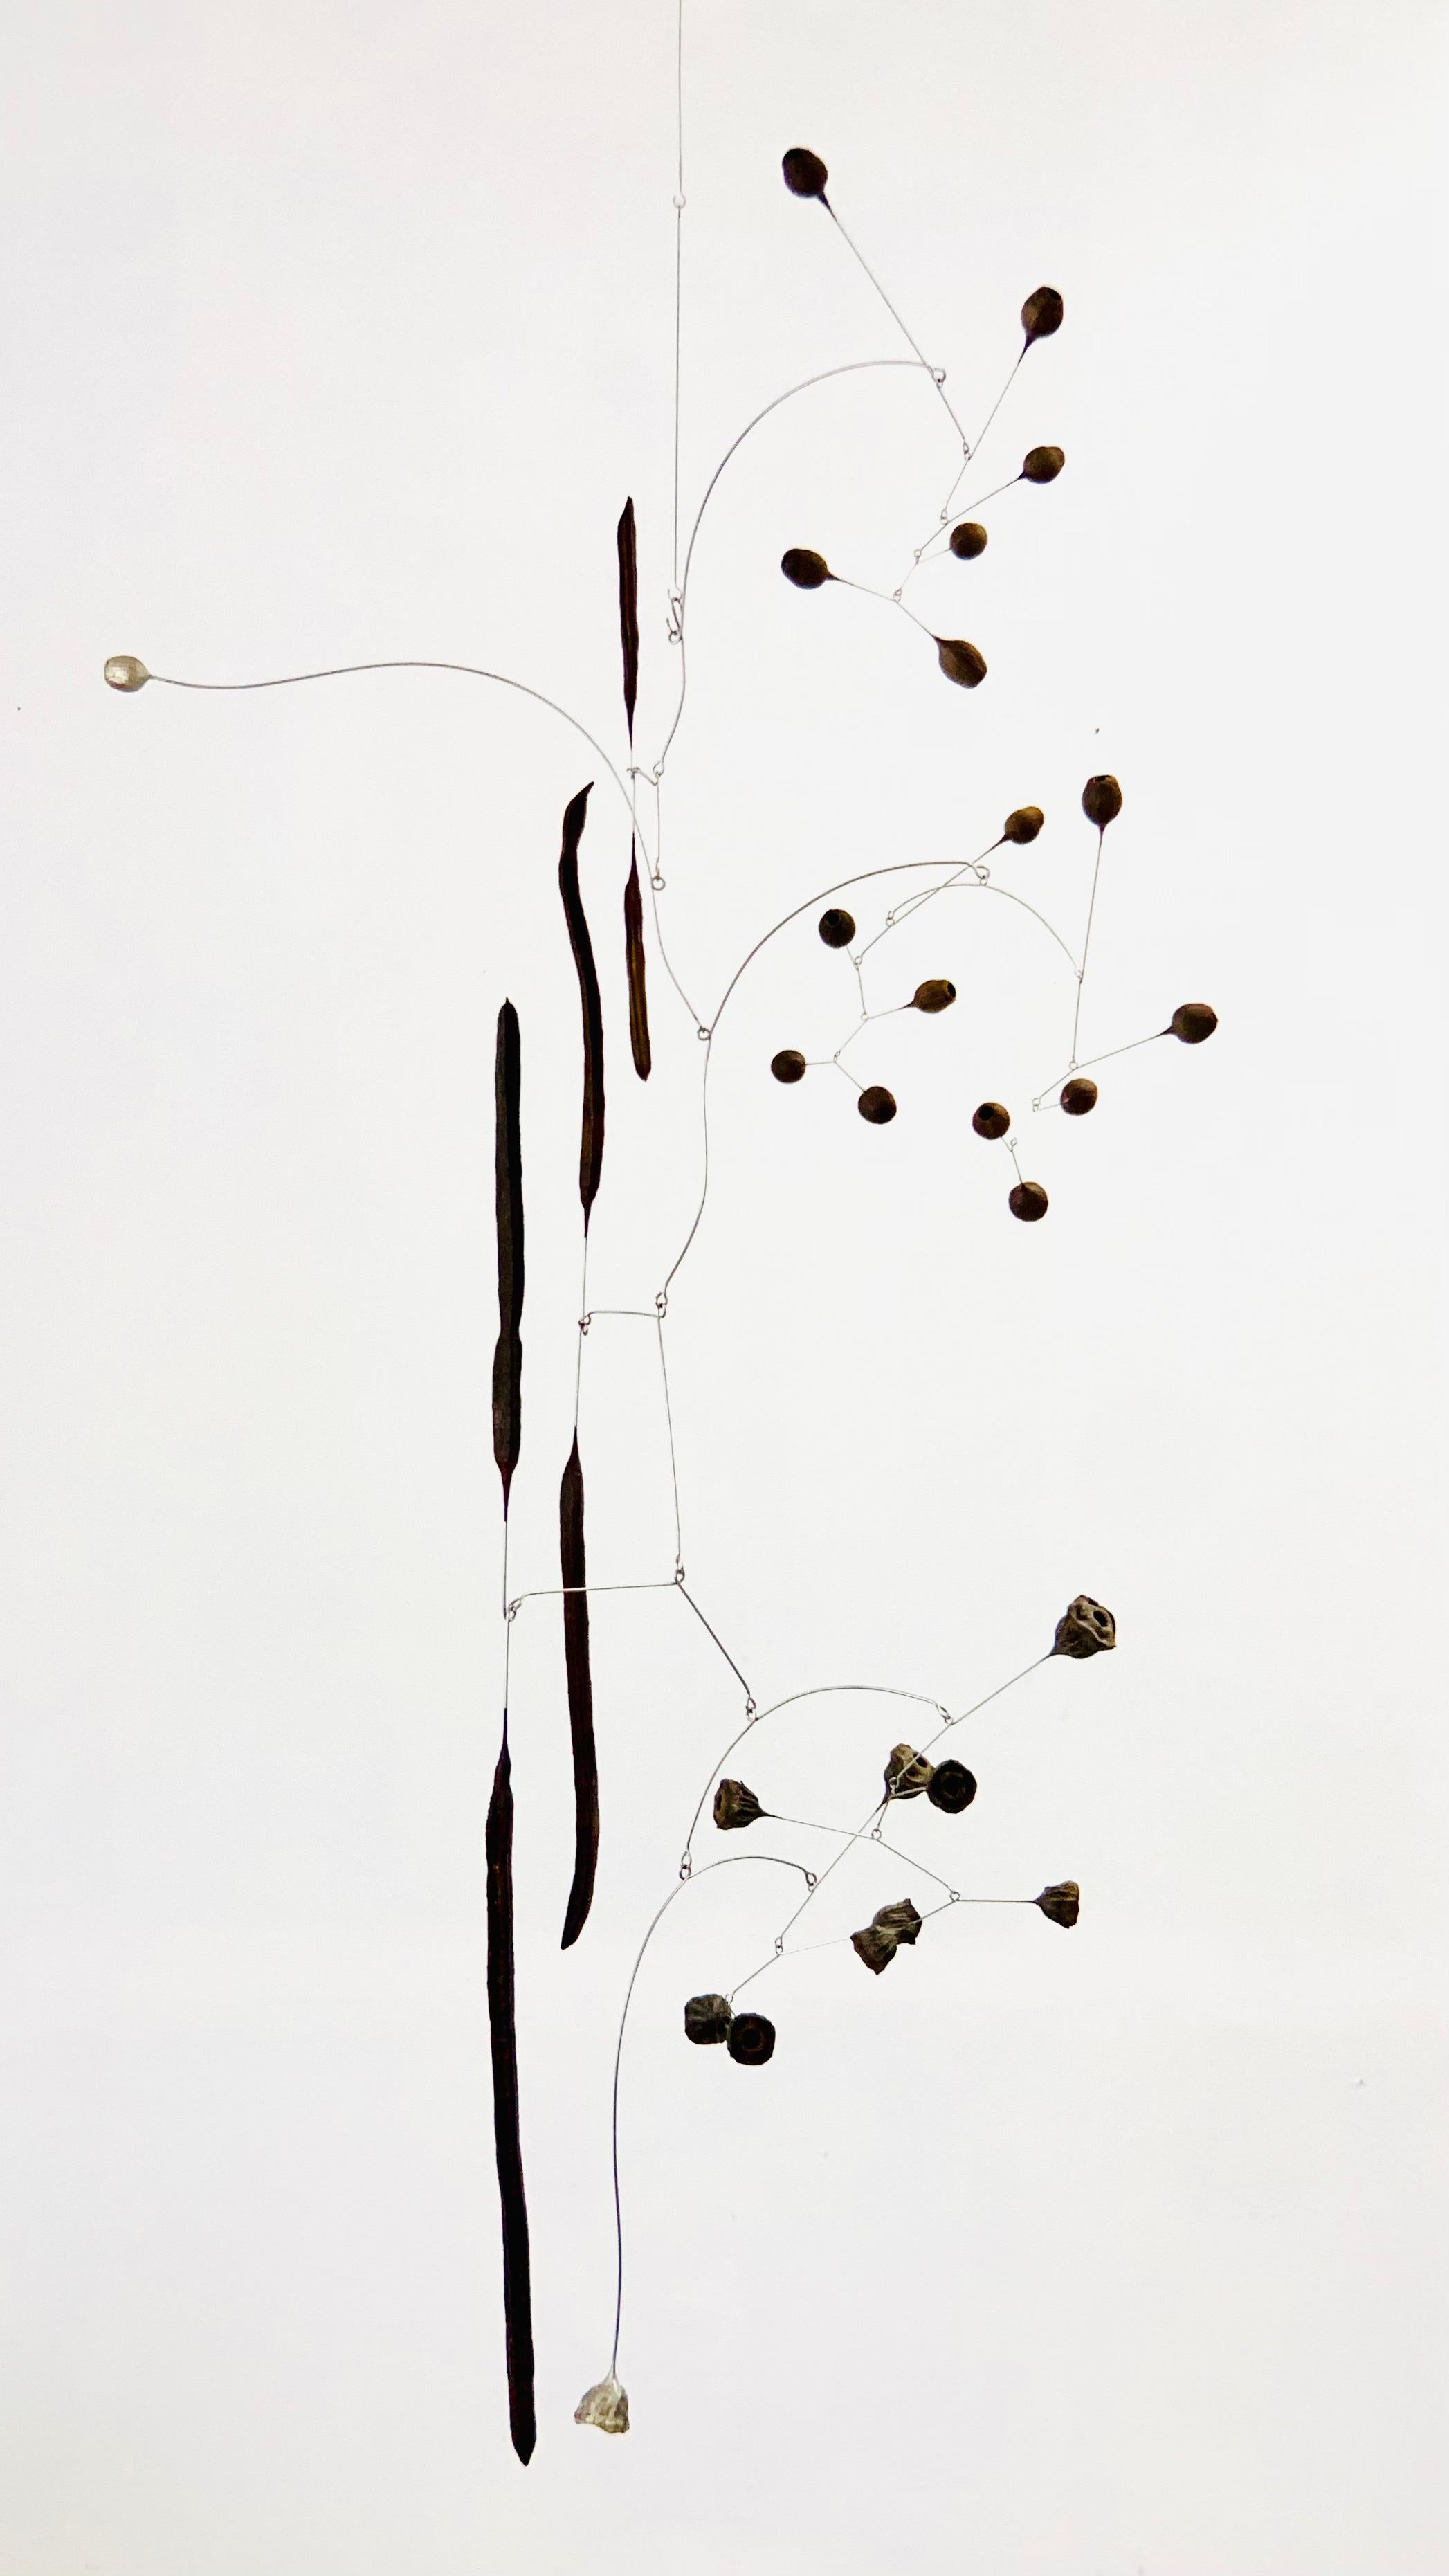 Rain Hanging Sculpture by Karolina Maszkiewicz
One Of A Kind.
Dimensions: D 91.4 x W 91.4 x H 177.8 cm. 
Materials: White bronze, stainless steel, eucalyptus, and gold medallion seed pods.

Karolina Maszkiewicz is a Polish-born American artist based